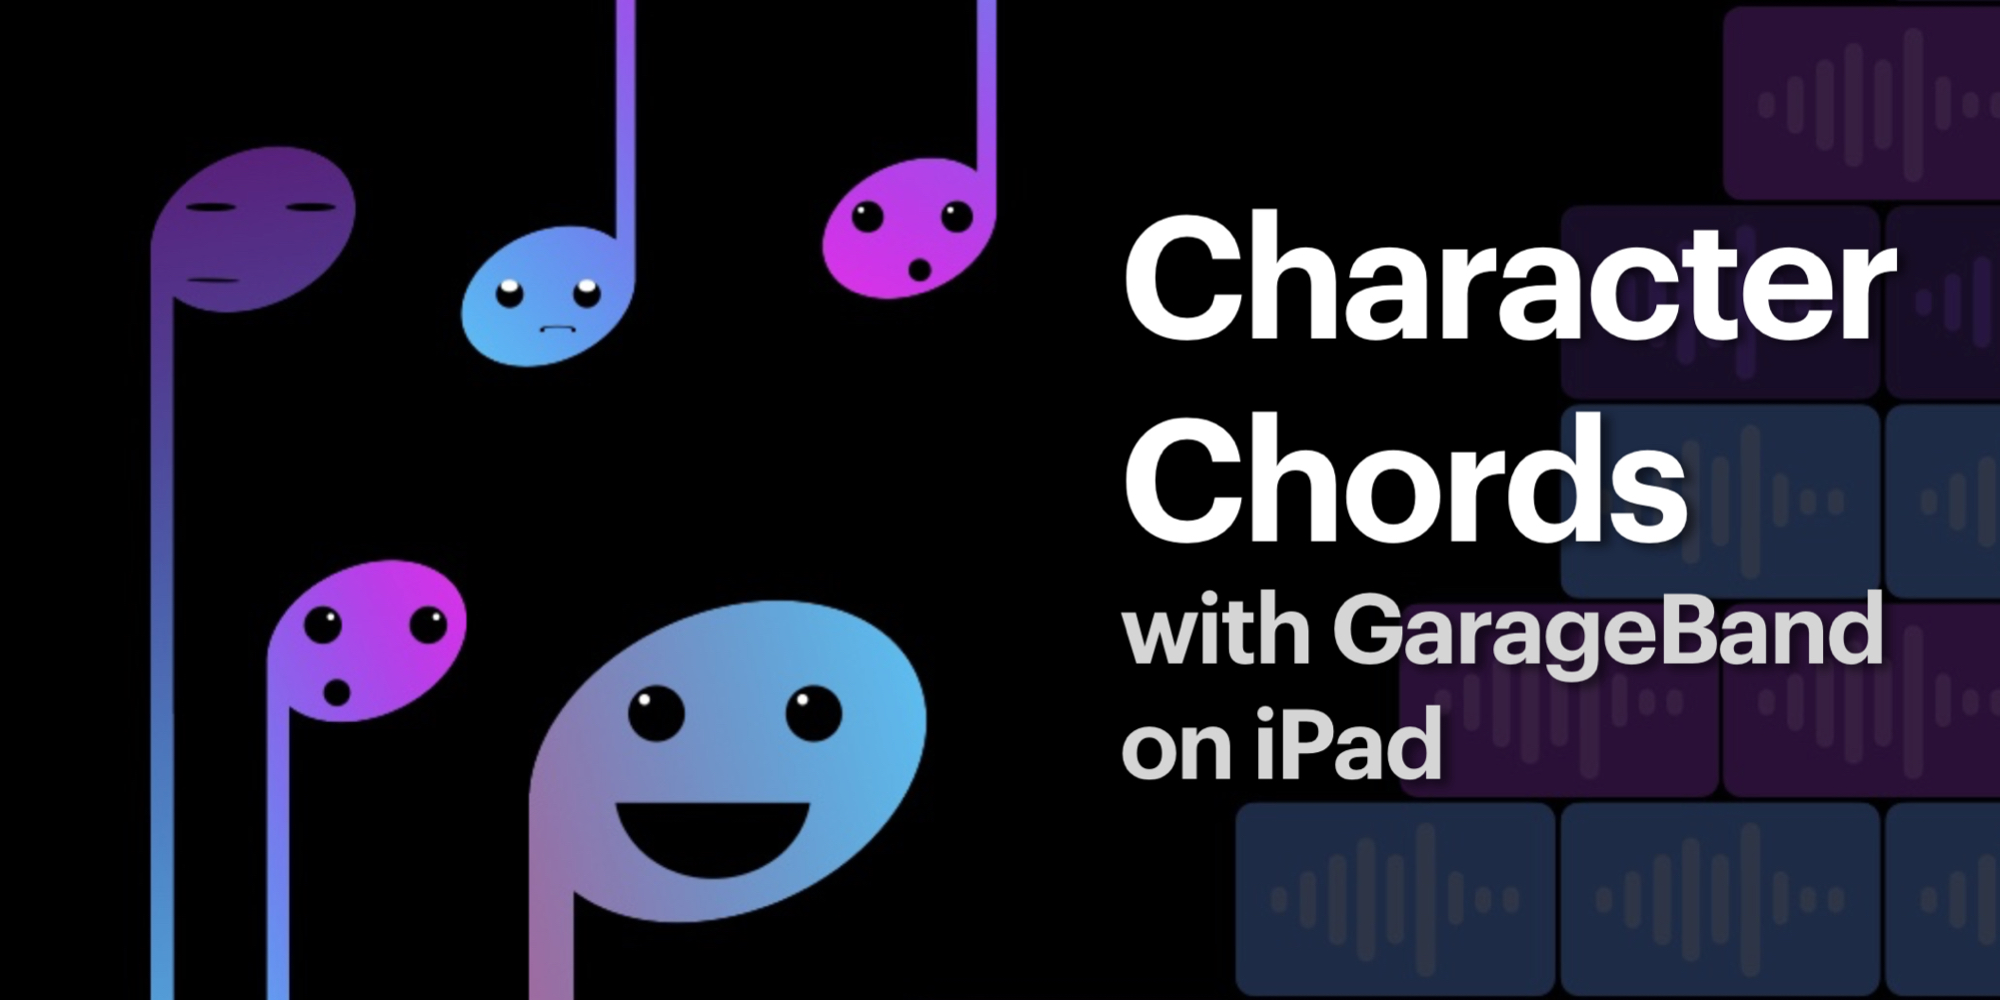 Character Chords with GarageBand on iPad.